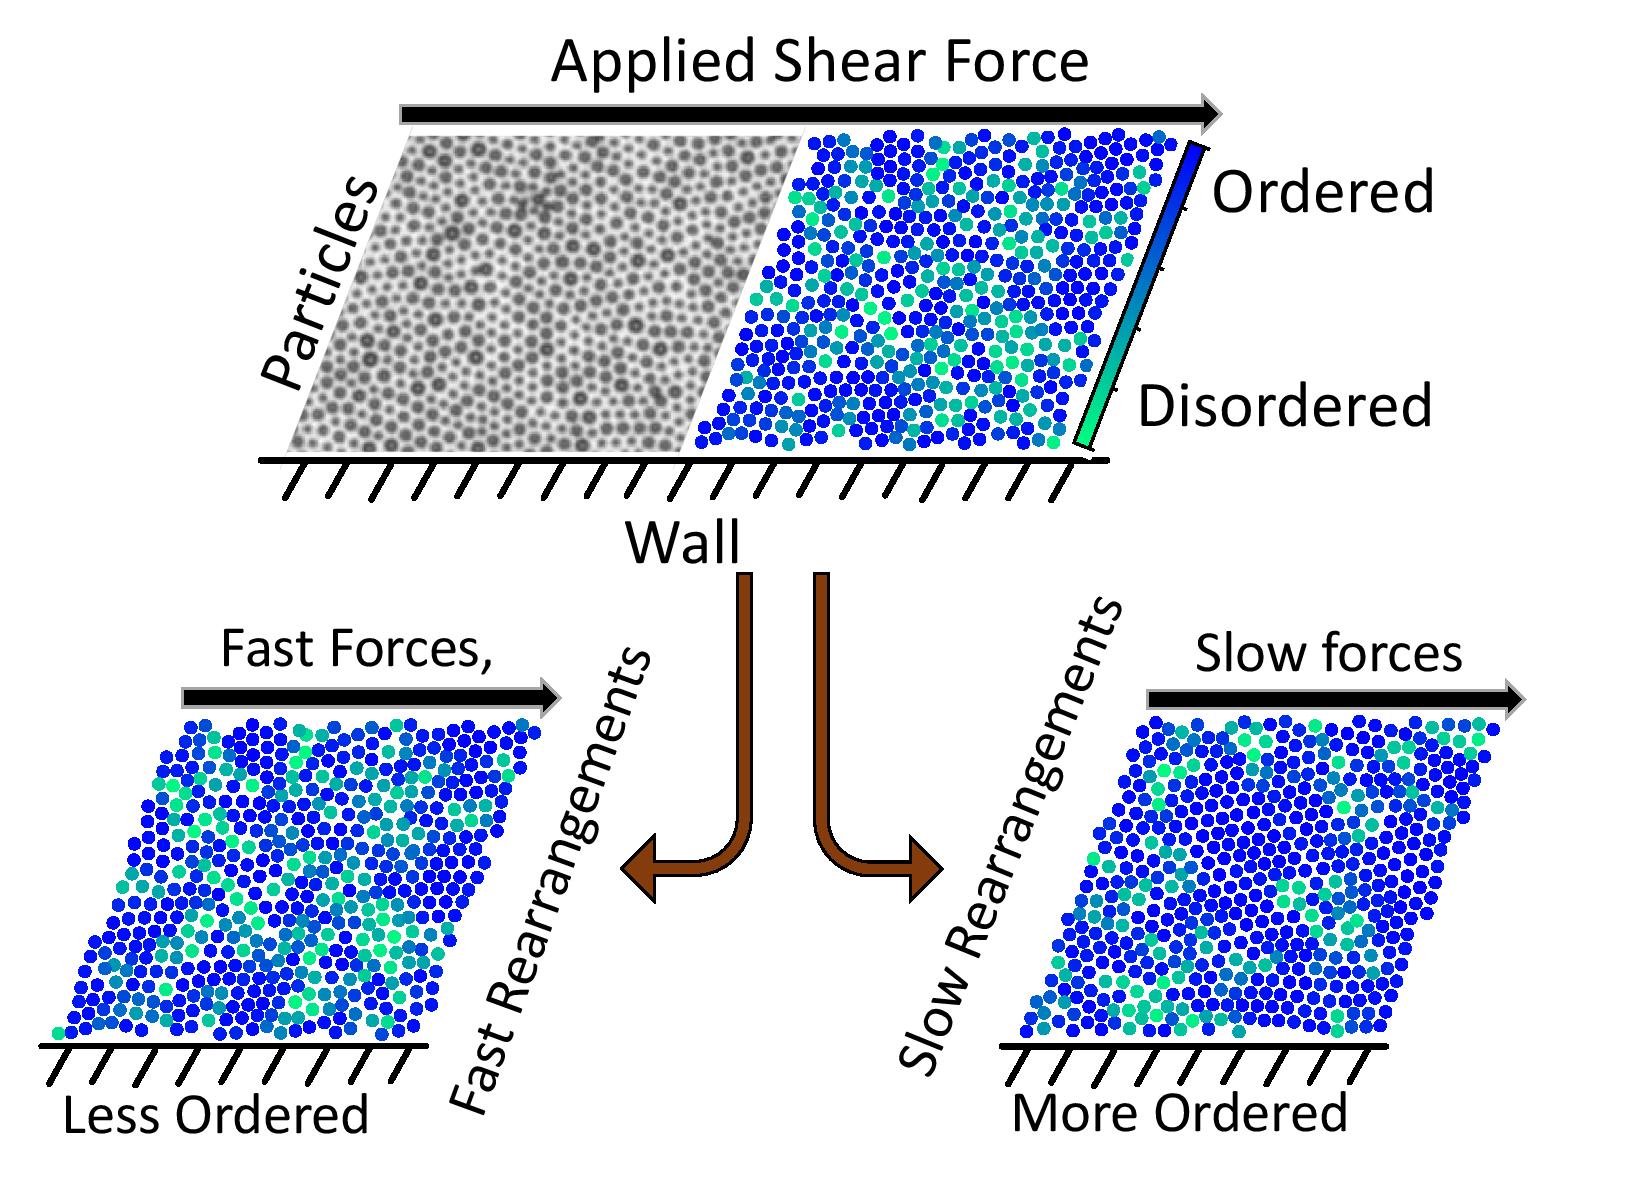 a diagram of the study results, showing particles in gray with an arrow indicating applied shear force on the top against a wall on the bottom, the far right panel shows a colored display of ordered versus disordered particles, then on the bottom arrows indicate that fast forces and fast rearrangements lead to less ordered materials while slow rearrangements and slow forces lead to more ordered materials